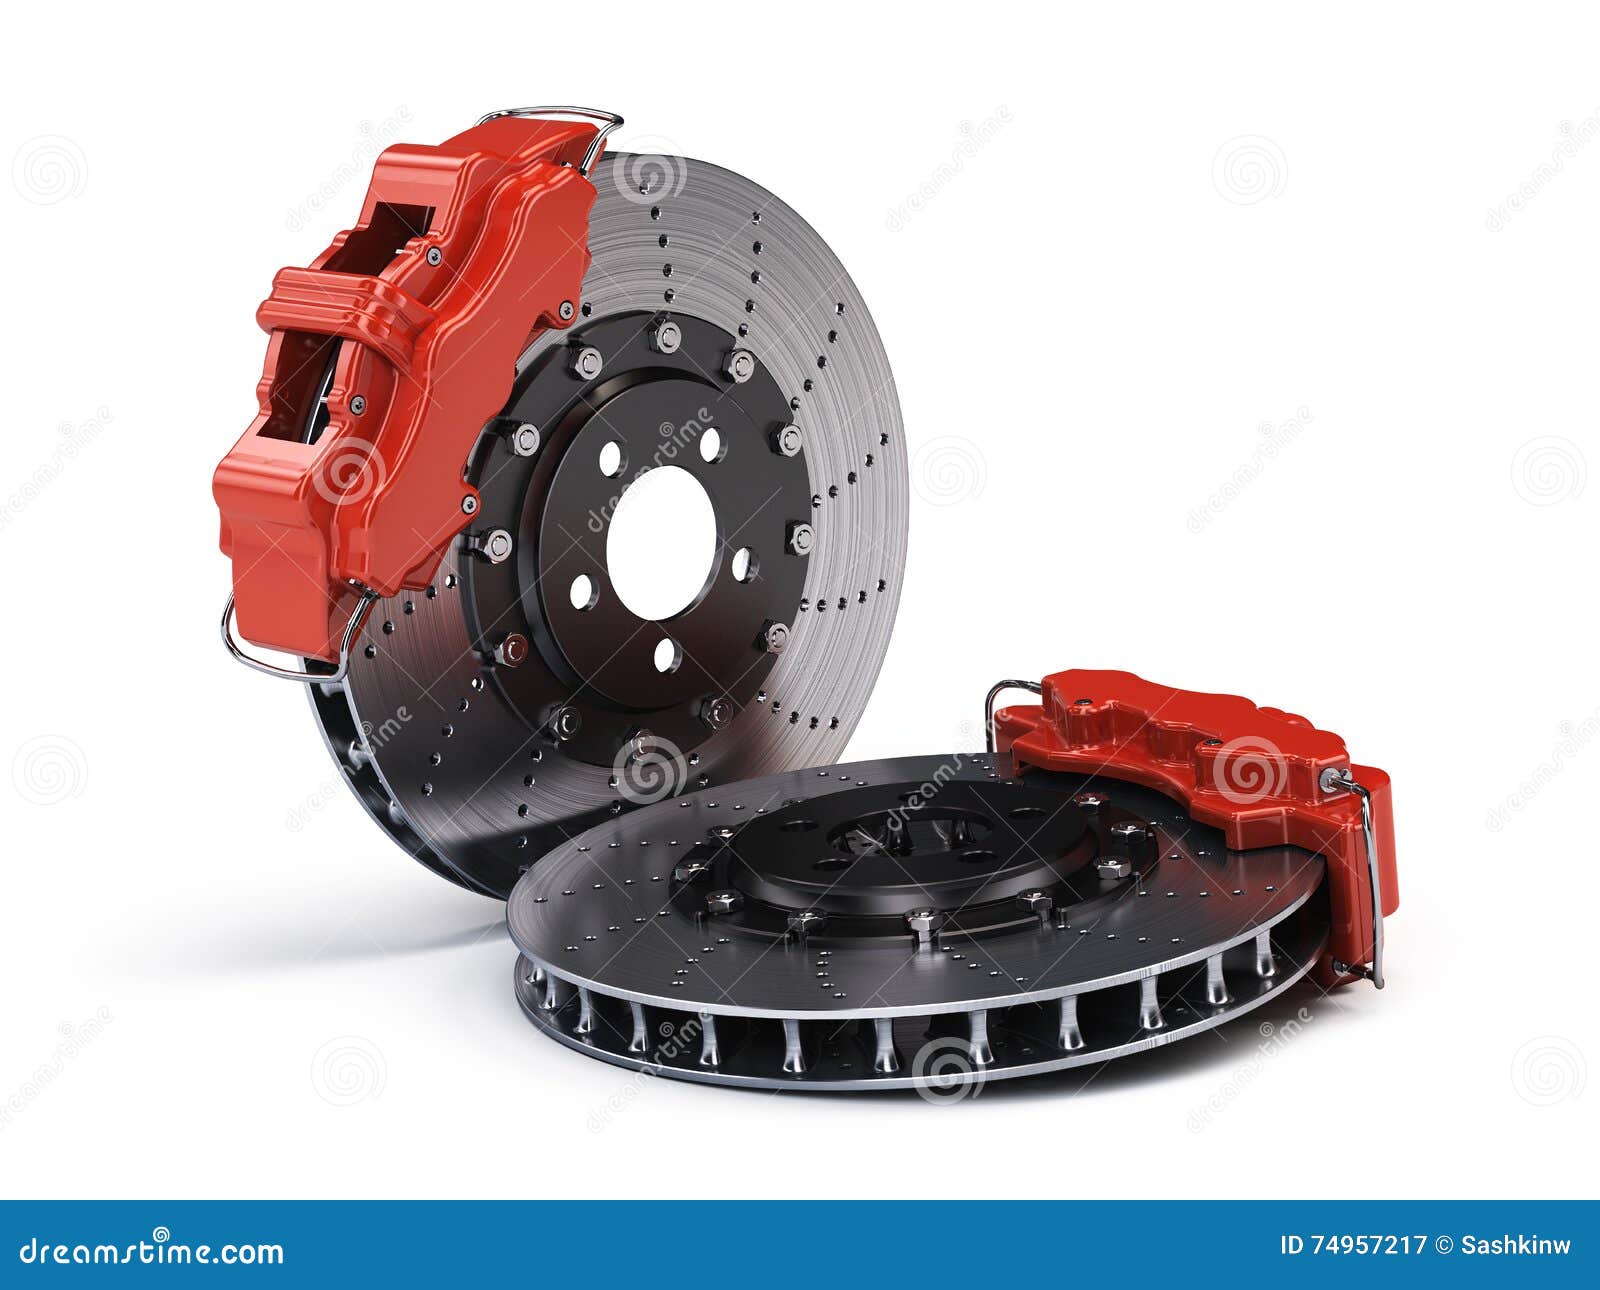 pair of brake discs with red sport racing callipers on white